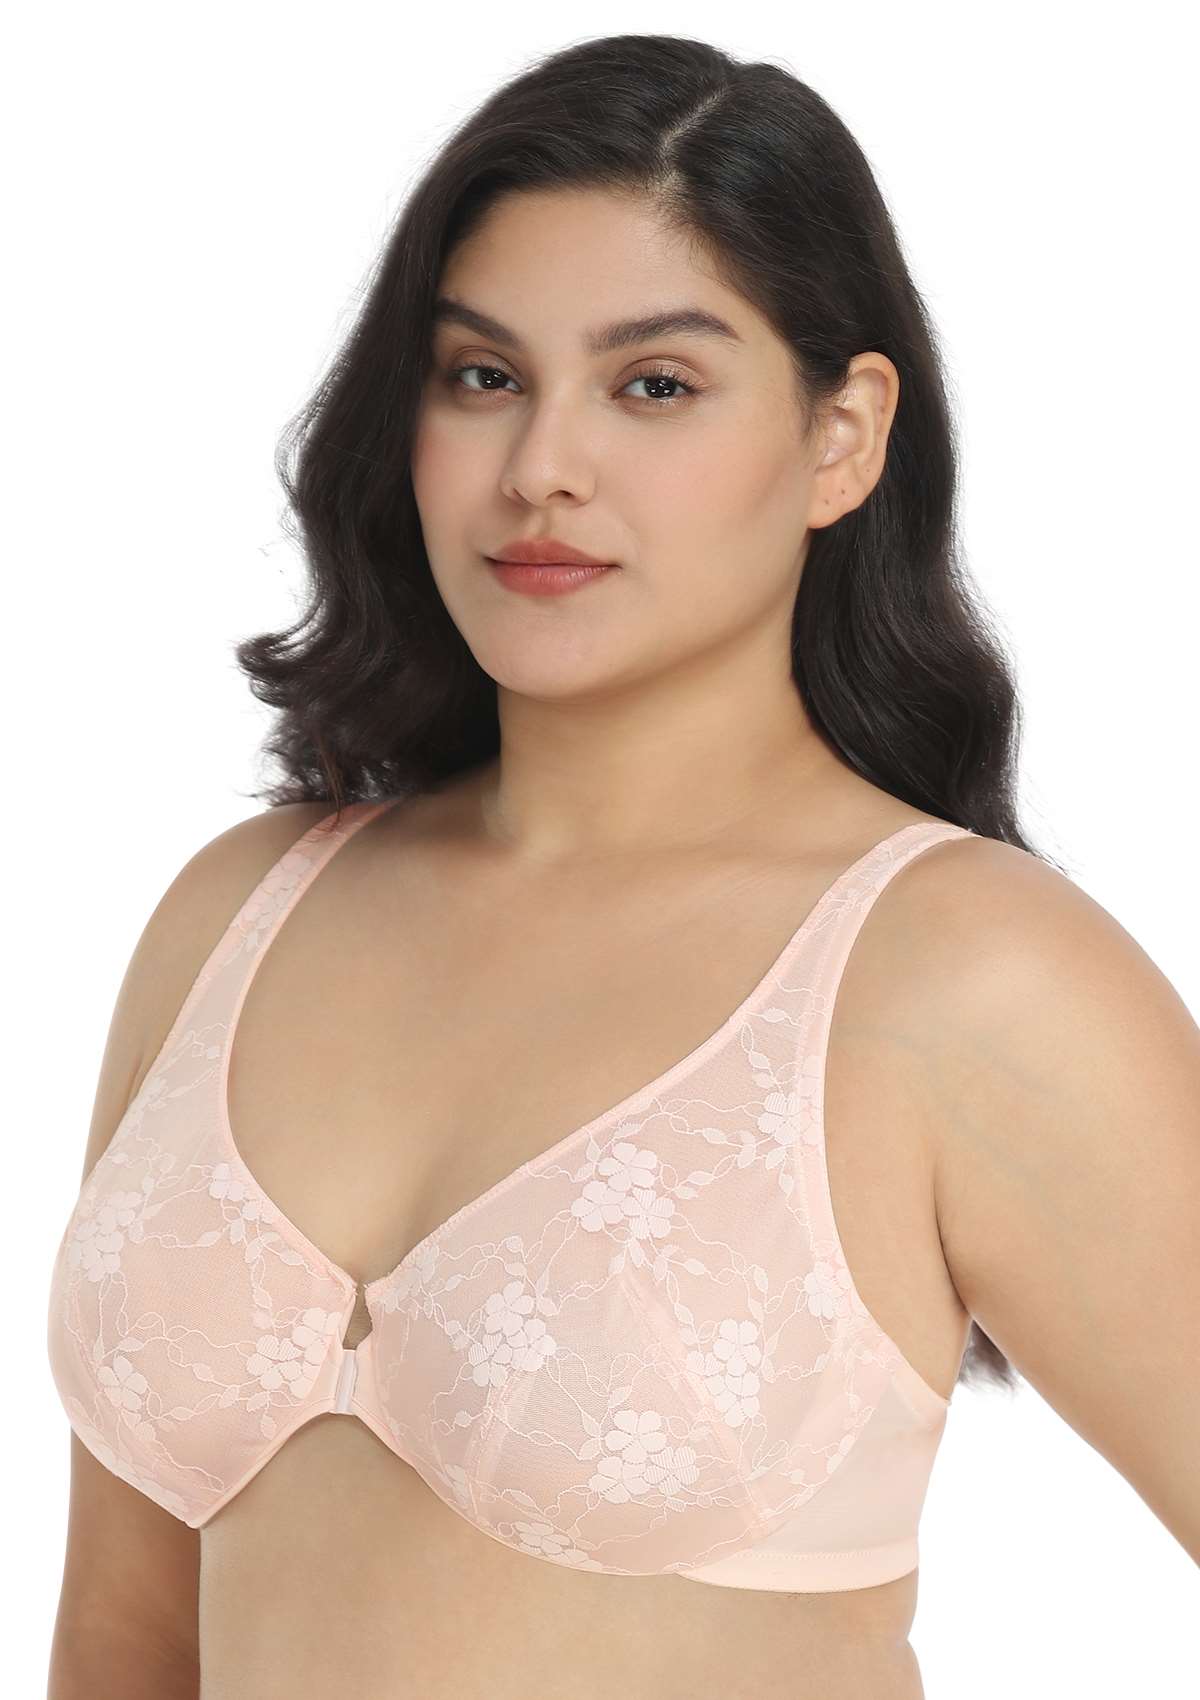 HSIA Spring Romance Front-Close Floral Lace Unlined Full Coverage Bra - White / 34 / H